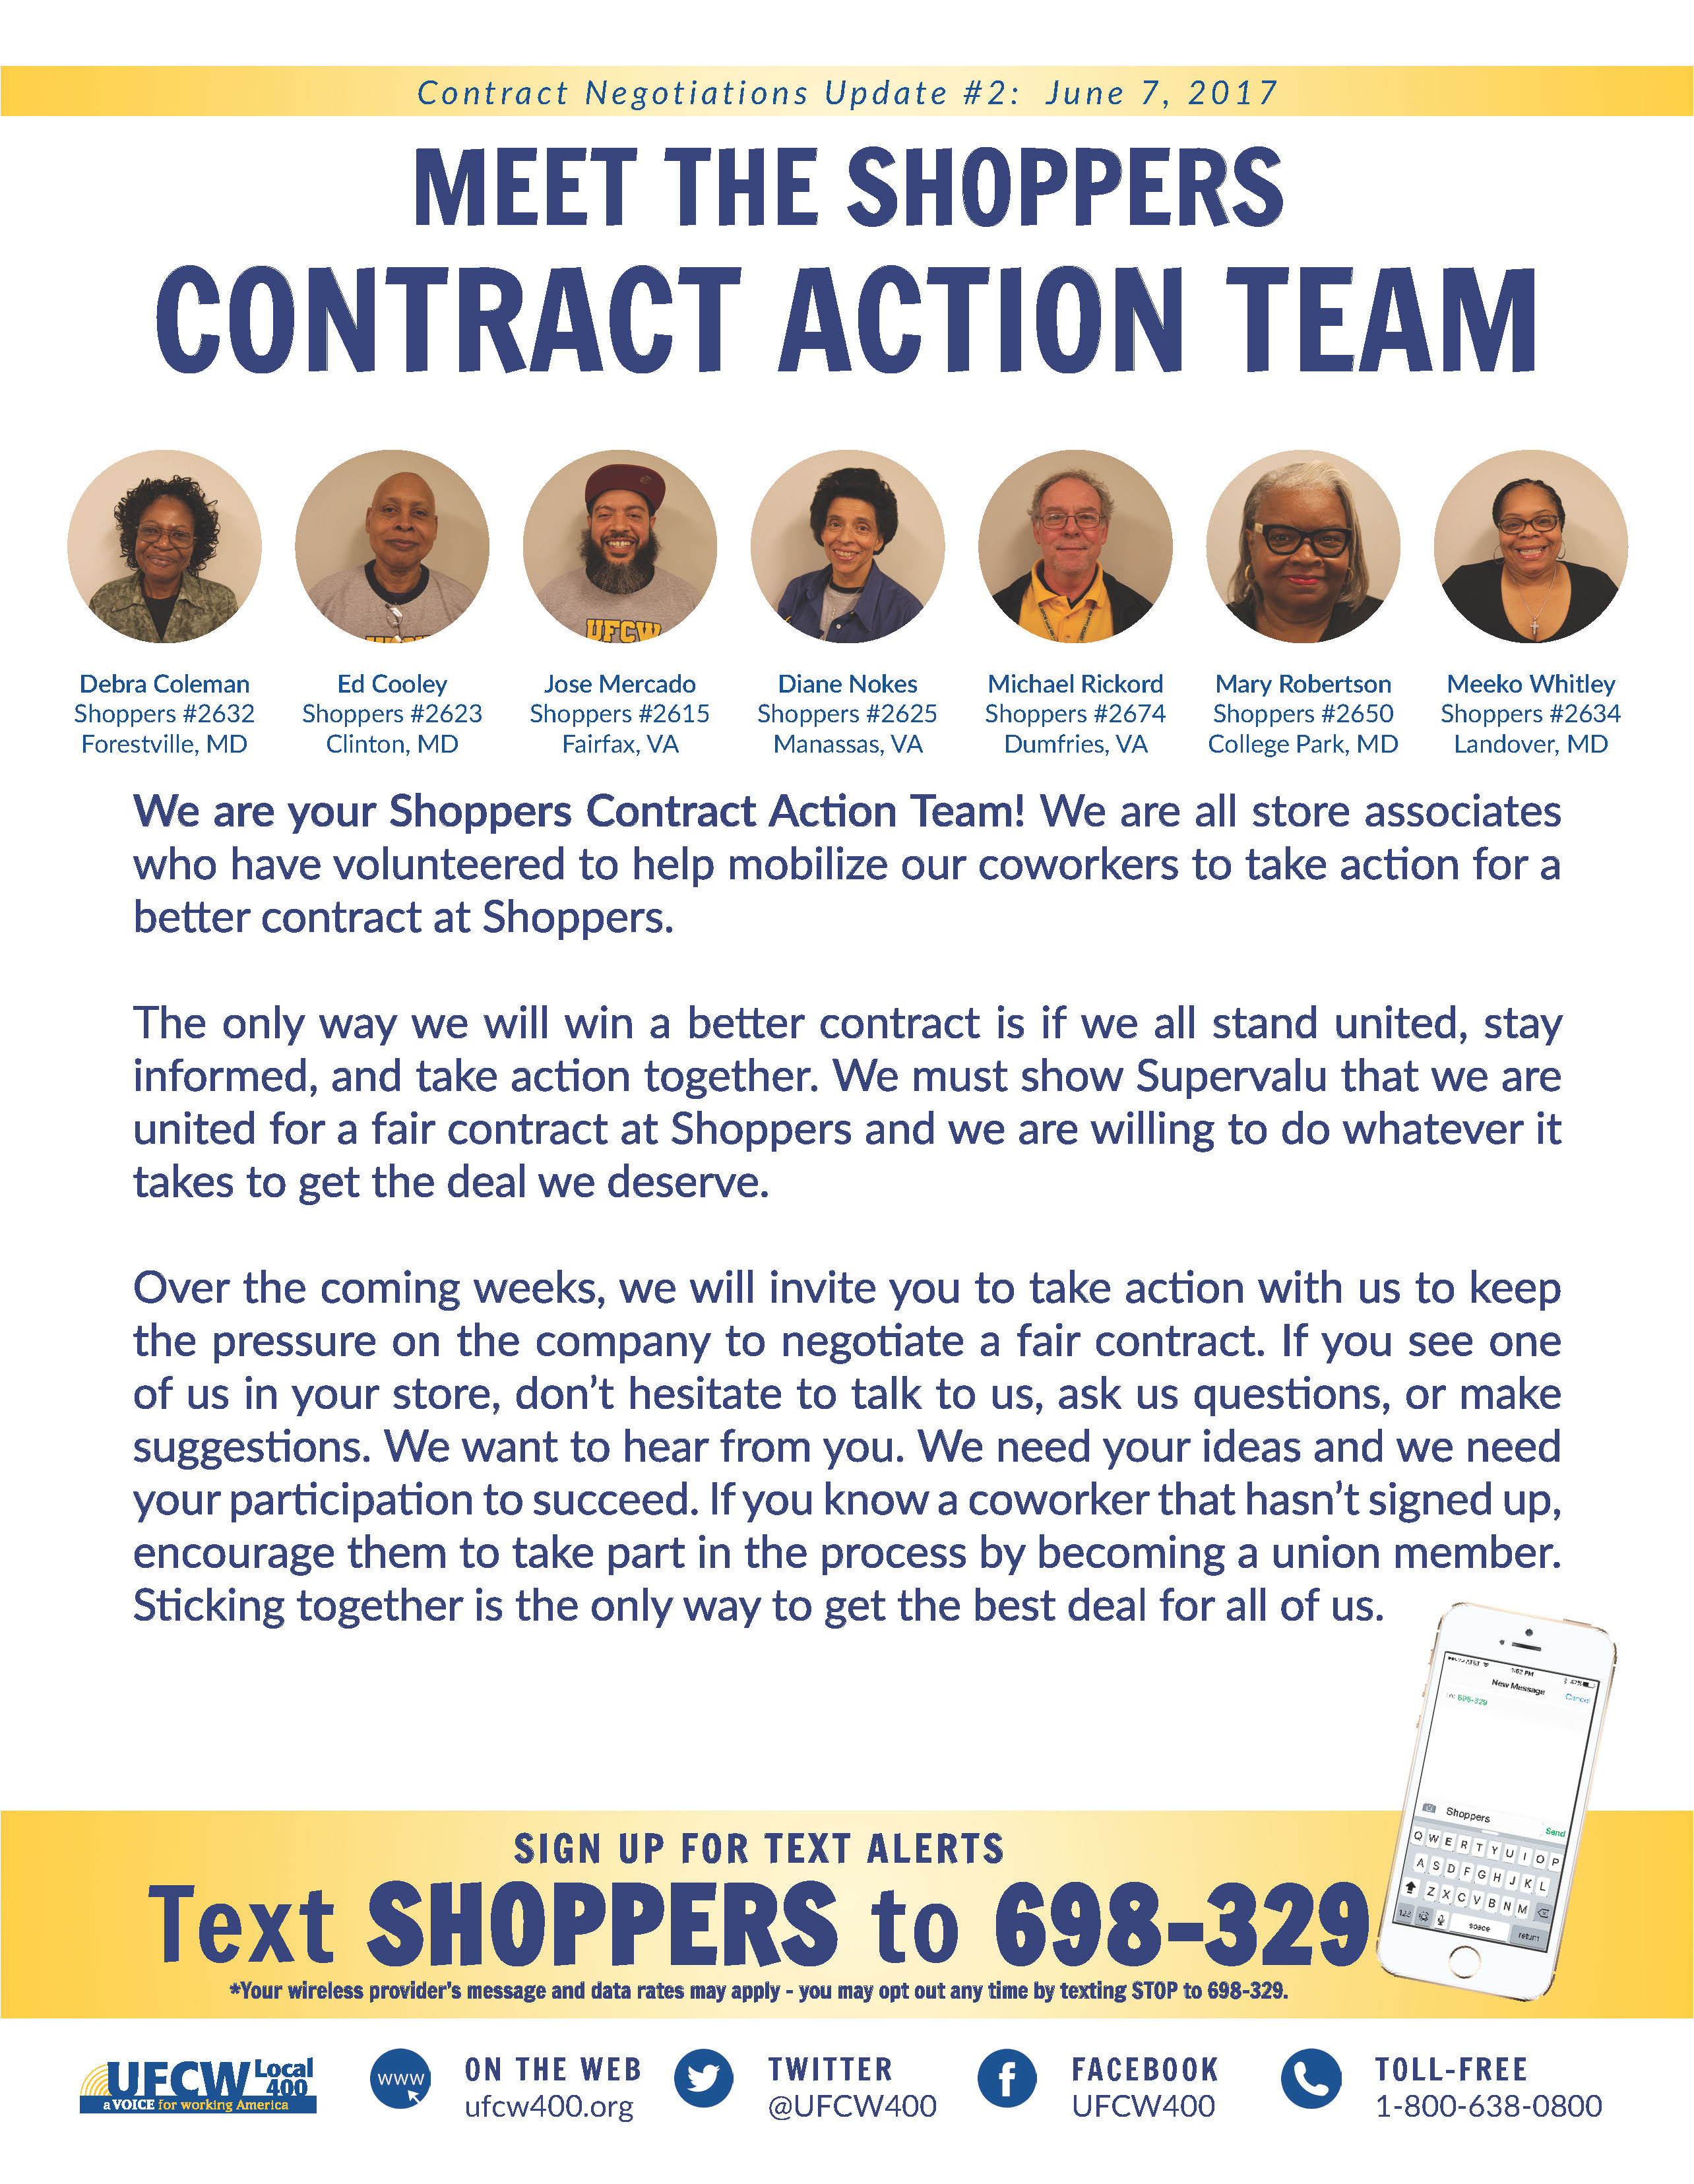 Meet the Shoppers Contract Action Team